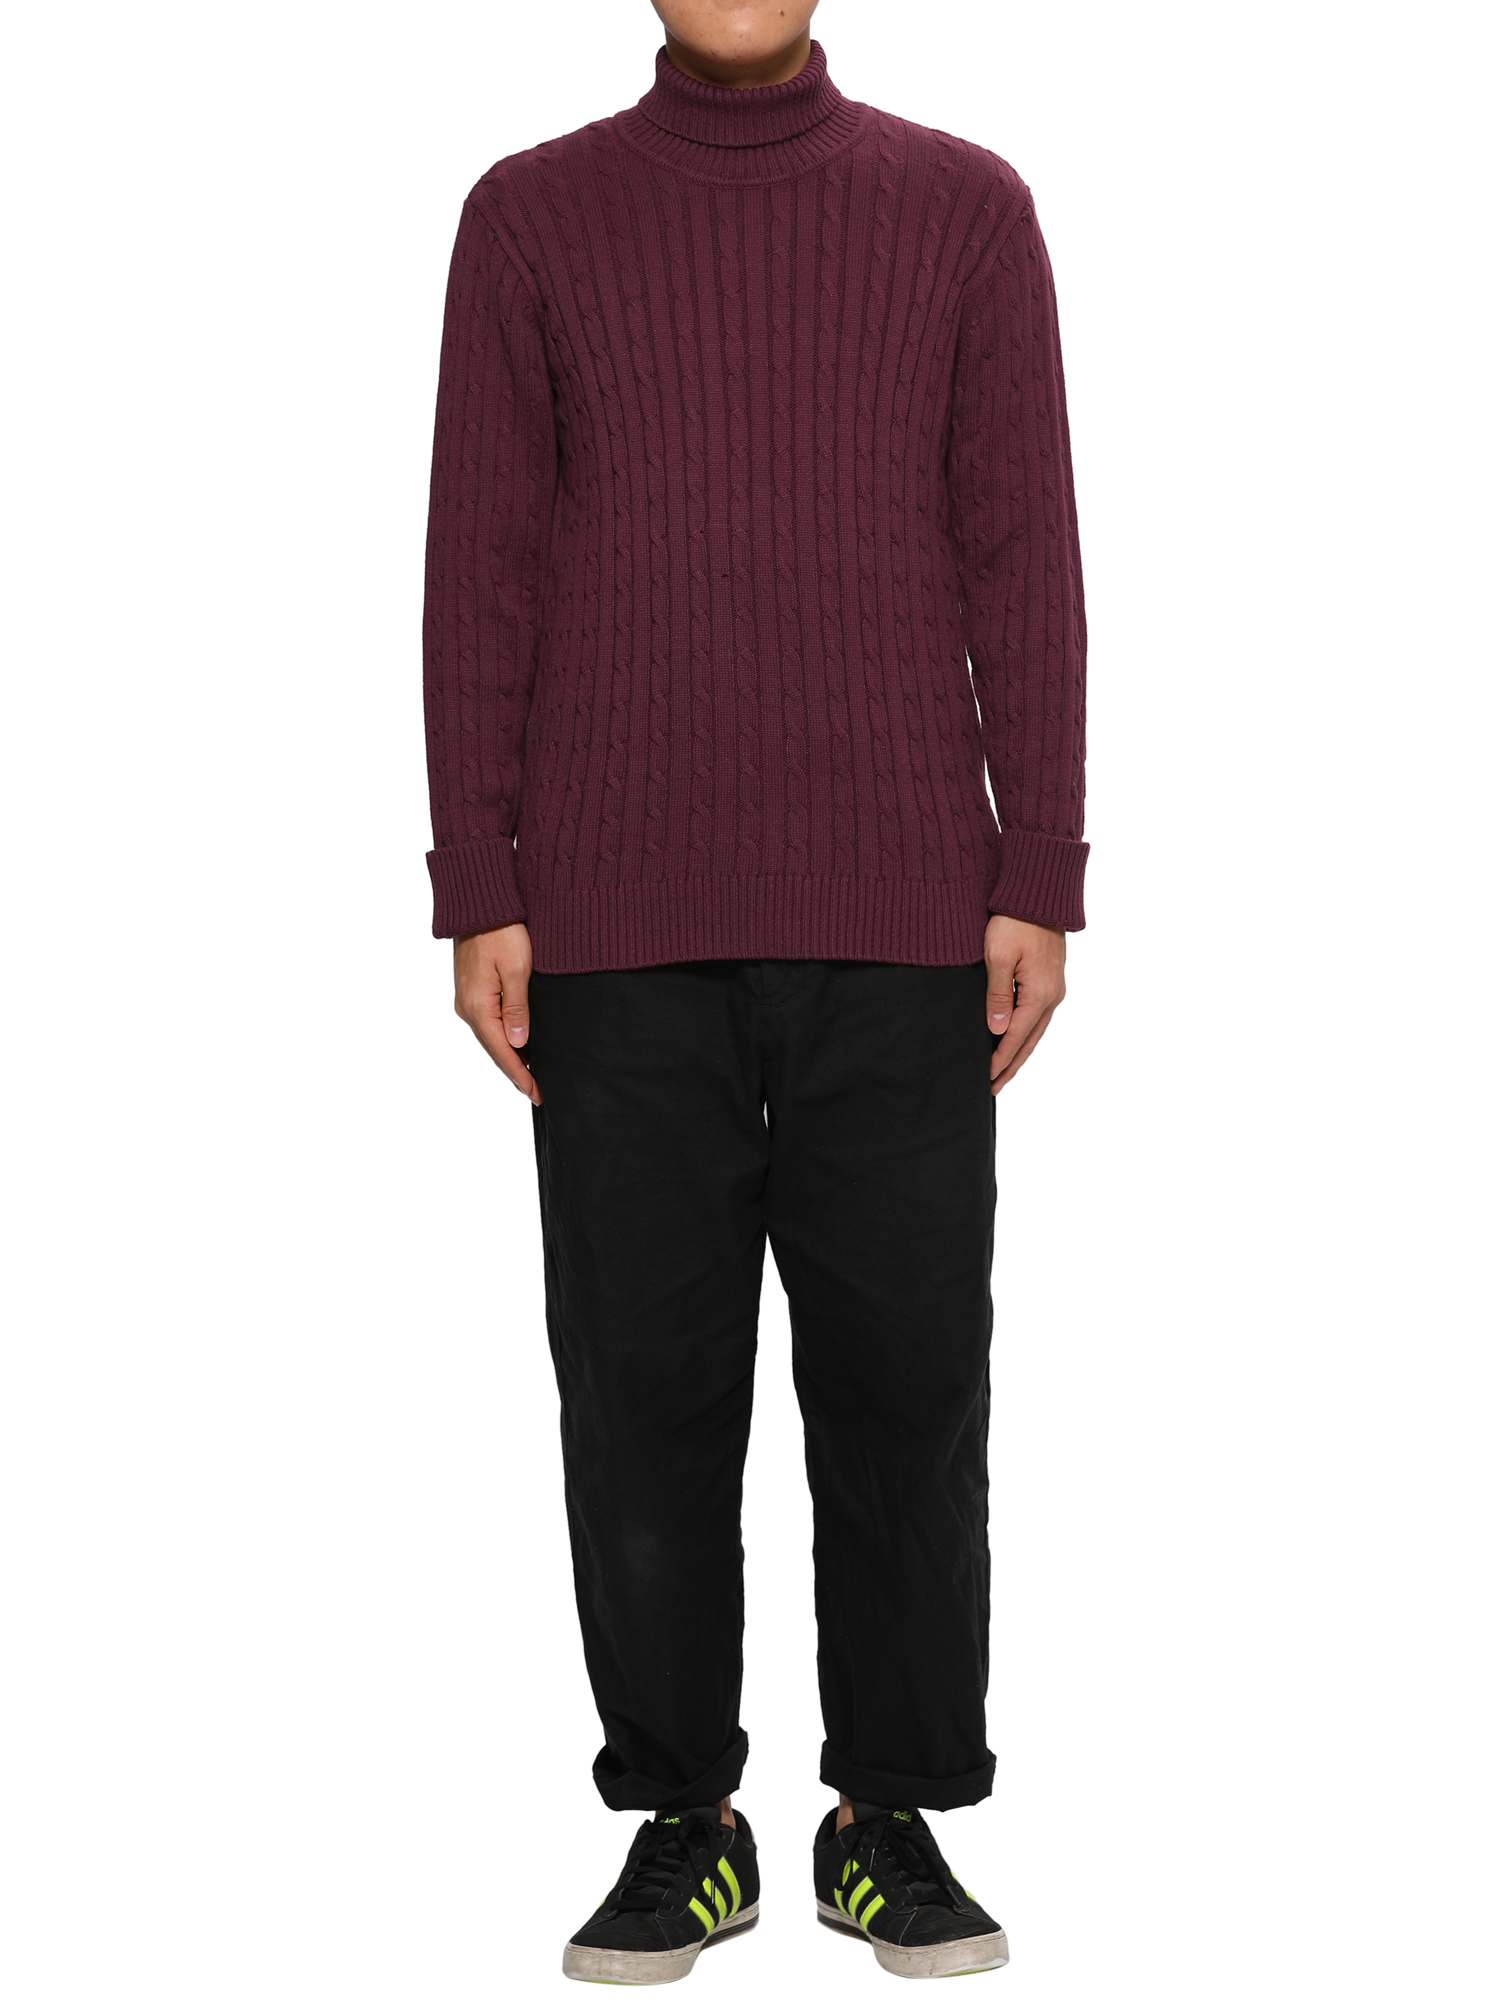 Unique Bargains Men's Turtleneck Long Sleeves Pullover Cable Knit Sweater - image 2 of 4